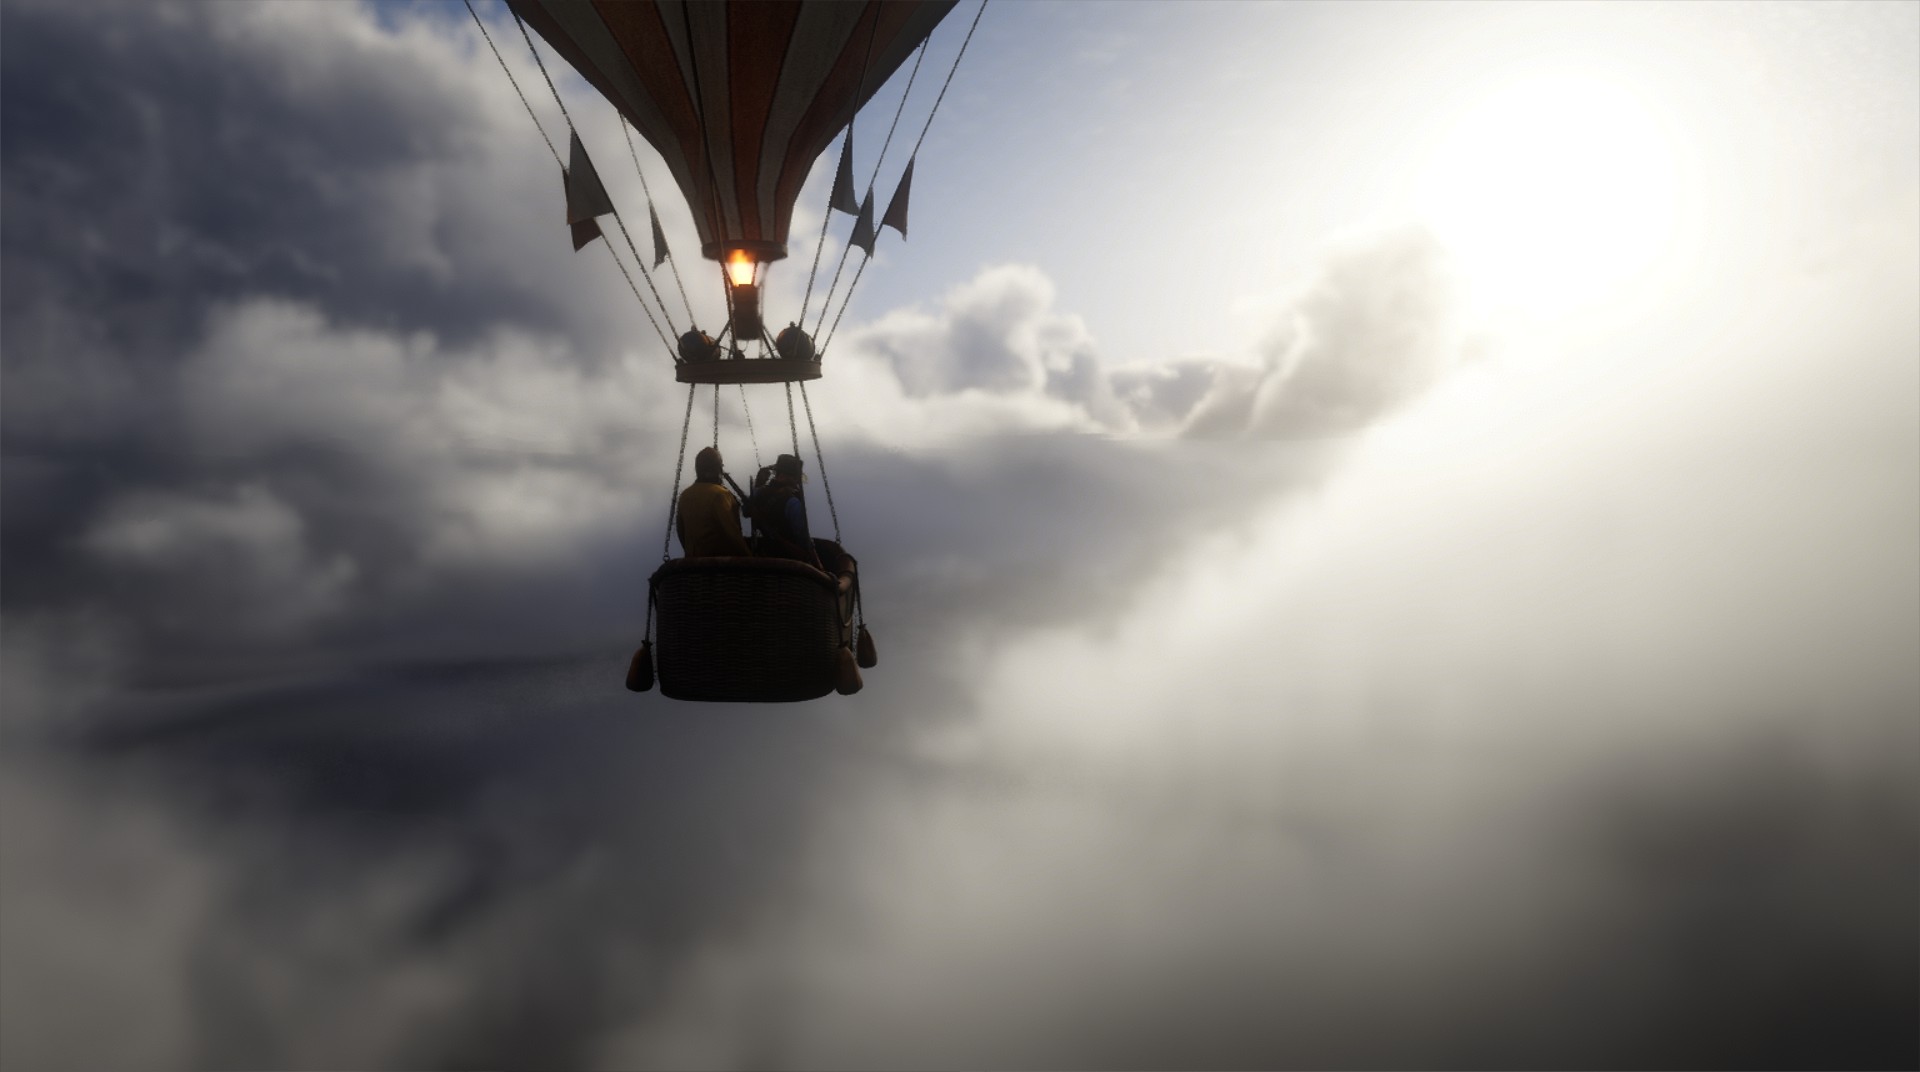 Red Dead Redemption 2 Clouds Hot Air Balloons Screen Shot Video Games 1920x1072